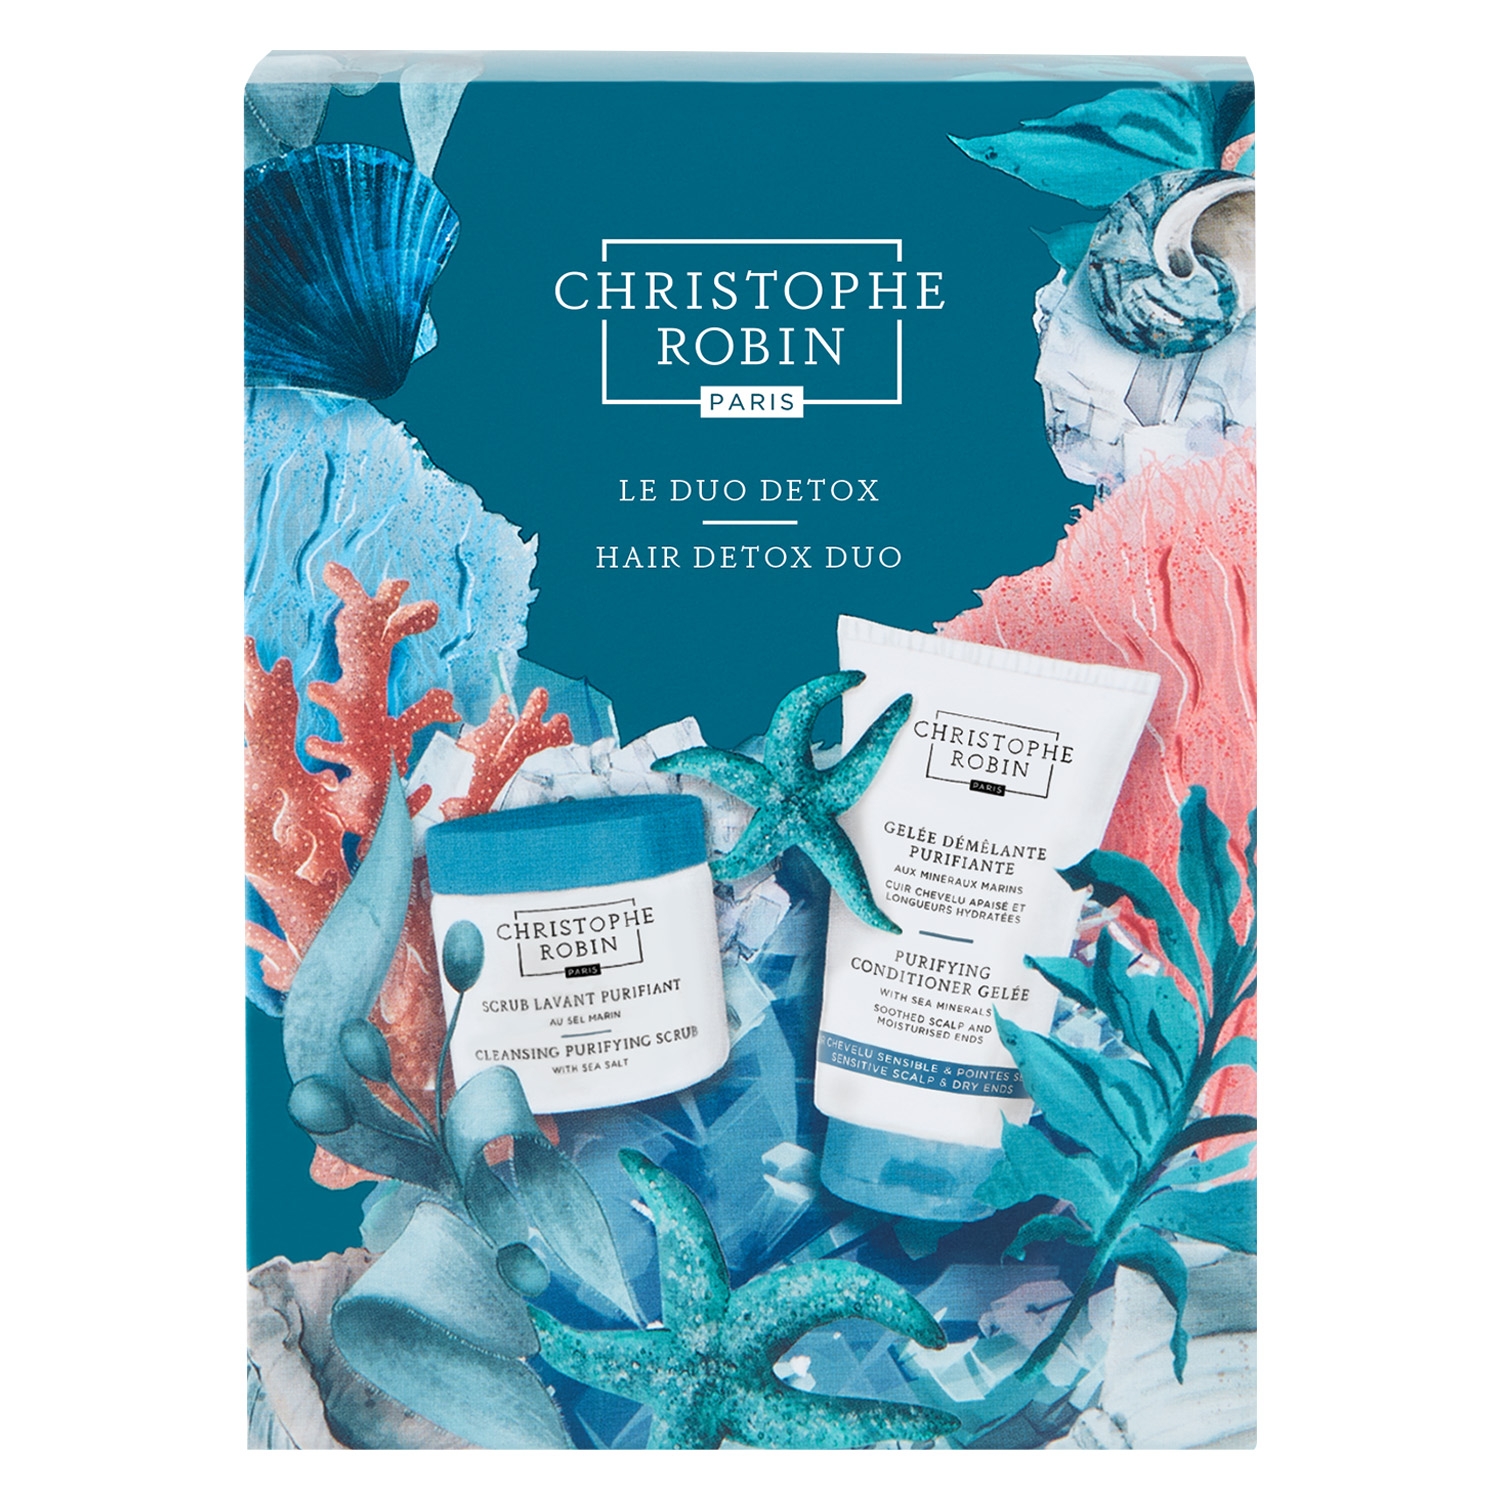 Product image from Christophe Robin - Hair Detox Duo